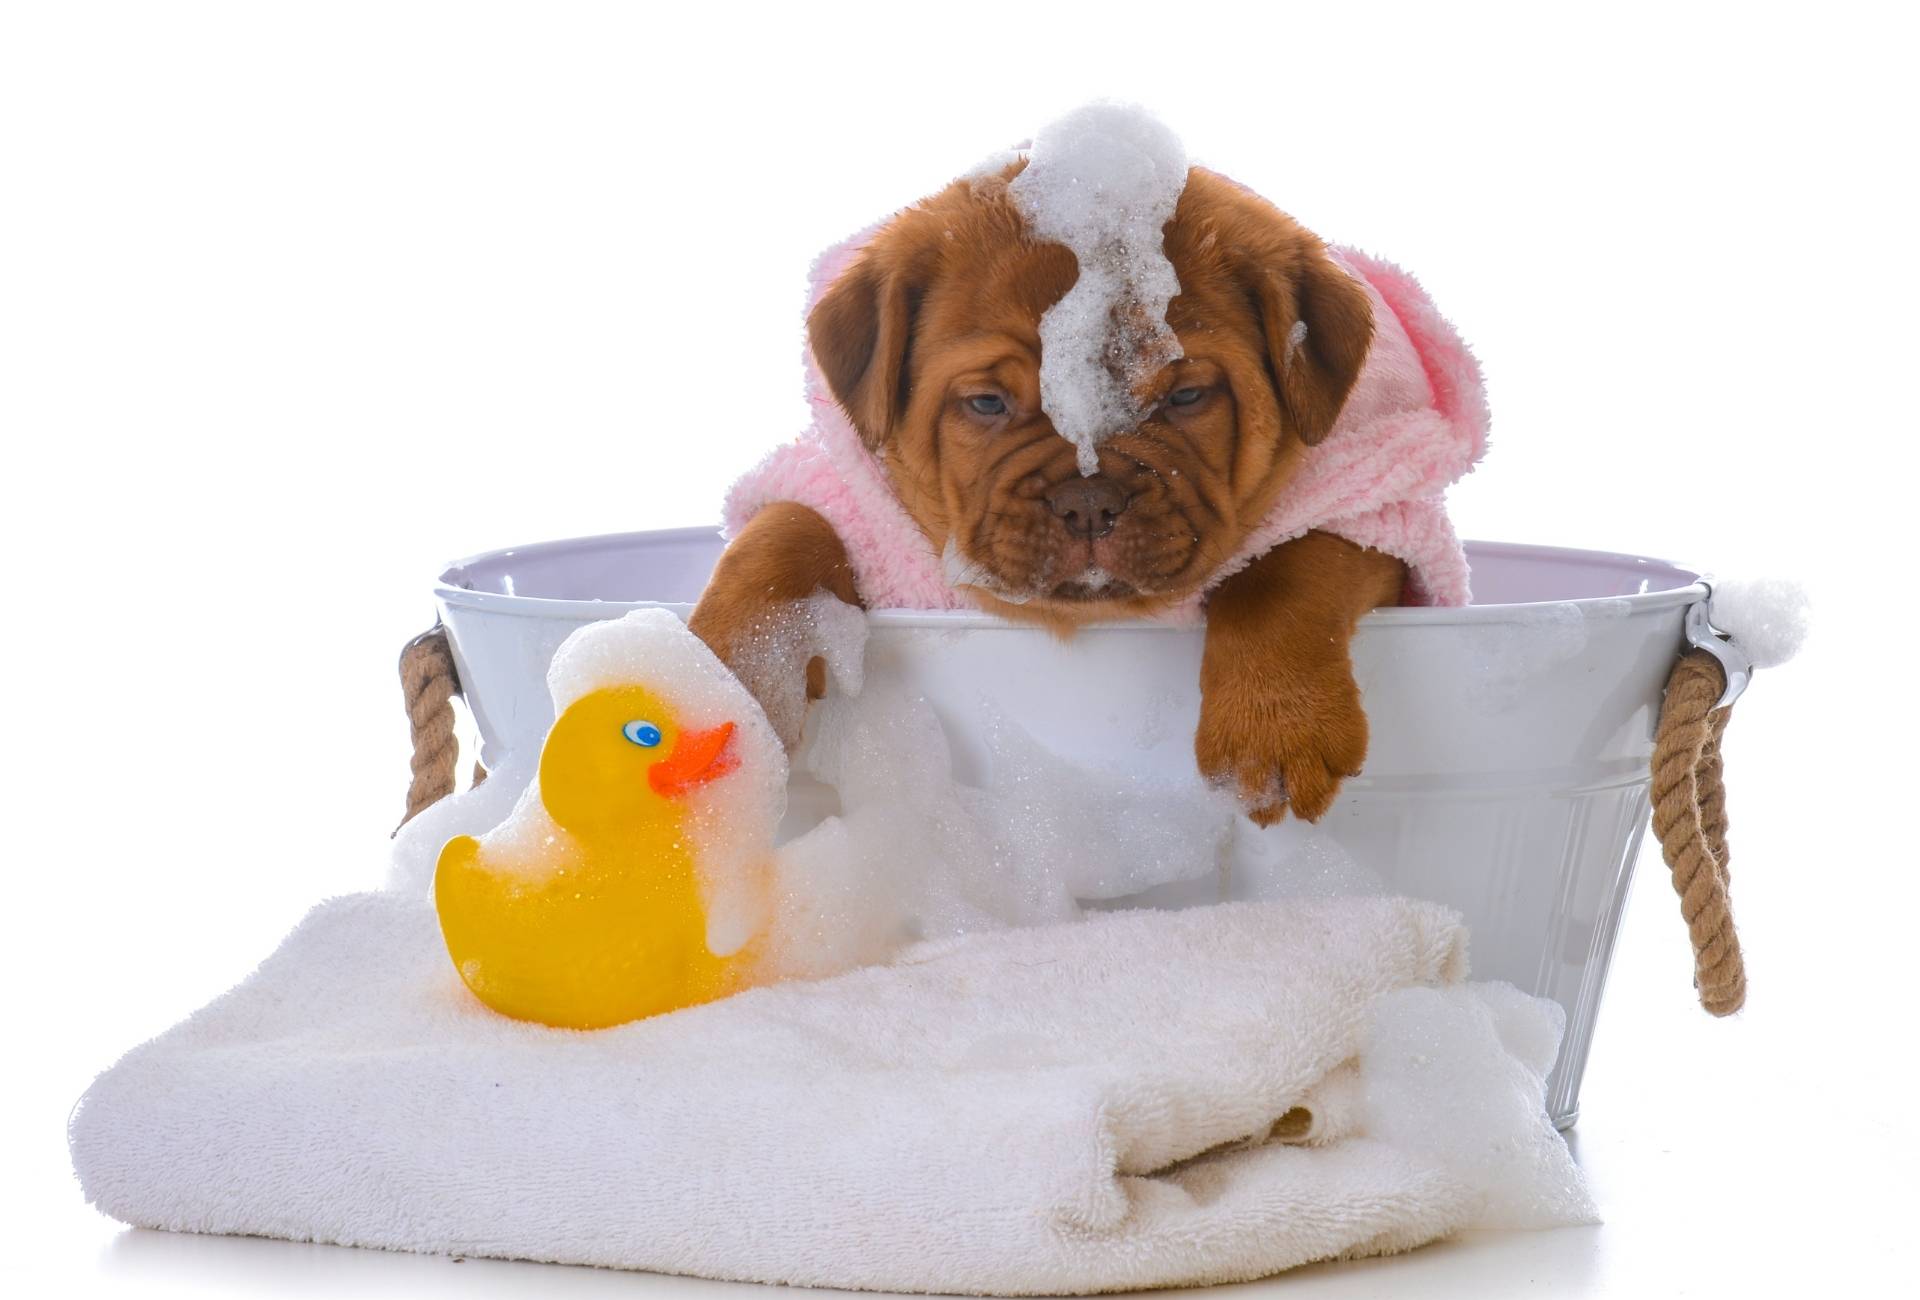 Dogue de Bordeaux puppy is bathed in a small bucket with a toy duck and towel.